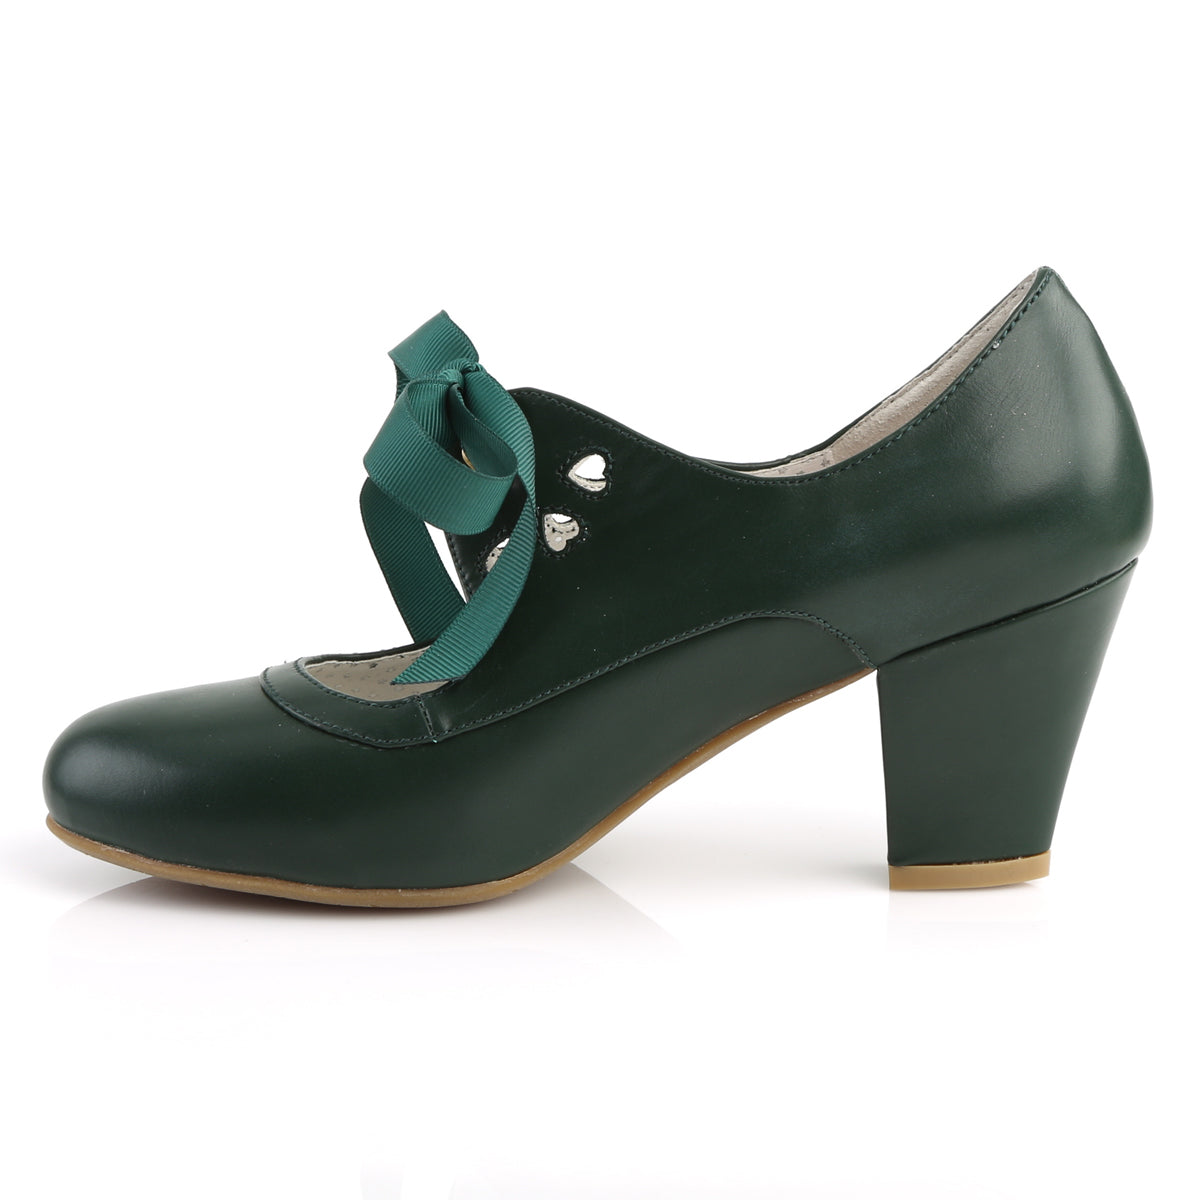 WIGGLE-32 Pin Up 2.5 Inch Heel Dark Green Fetish Footwear-Pin Up Couture- Sexy Shoes Pole Dance Heels